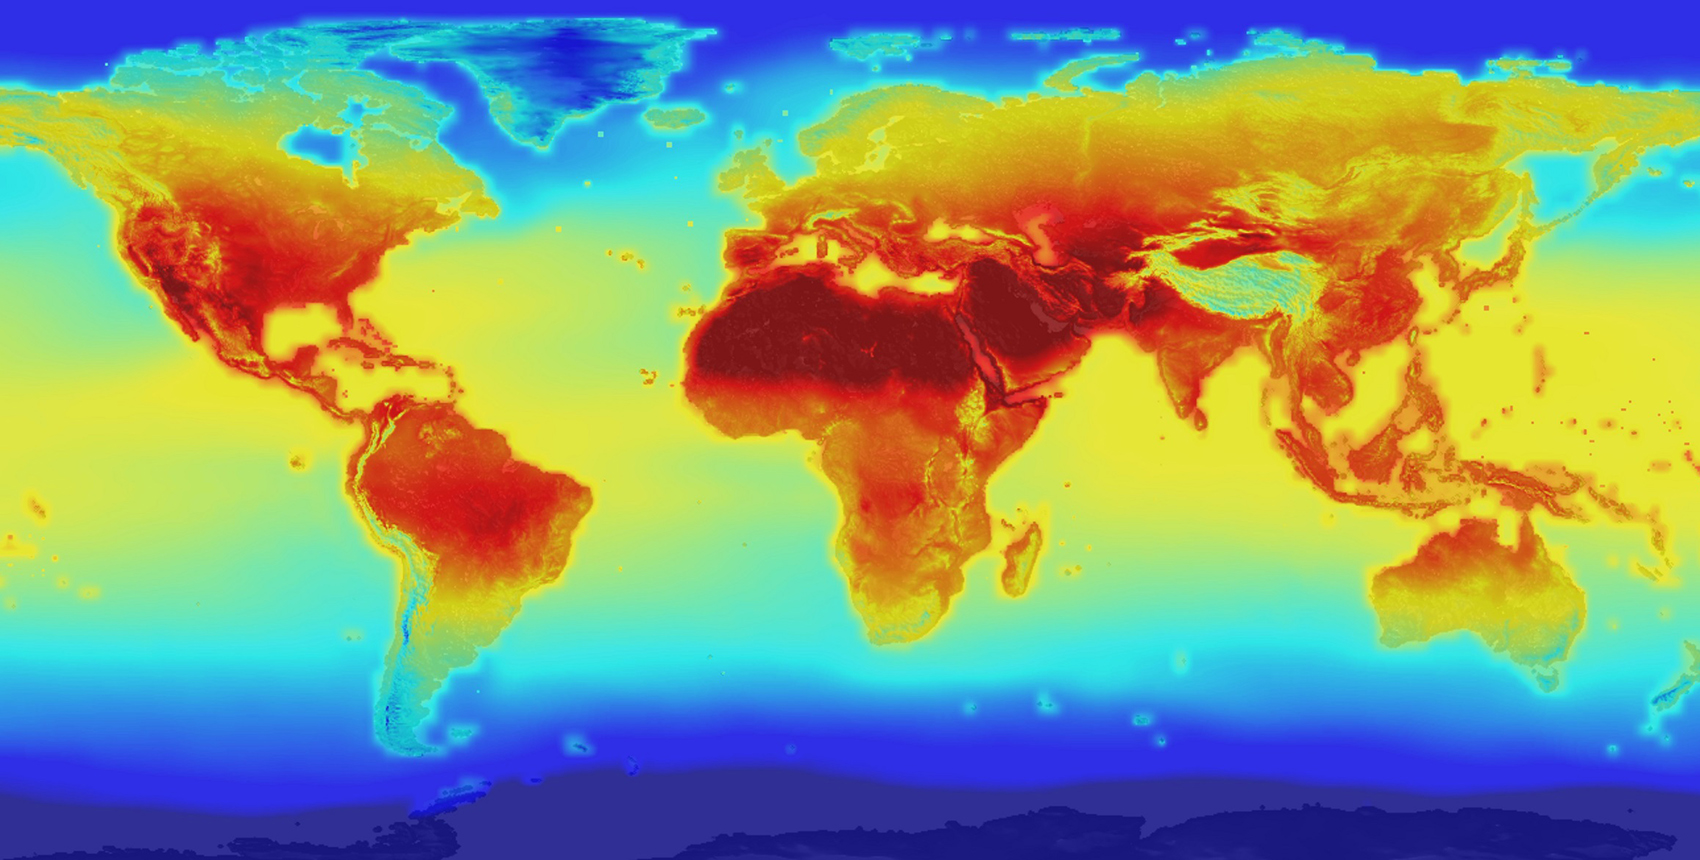 A false color map of the world with red, orange and yellow indicating predicted temperature increases due to greenhouse gases.